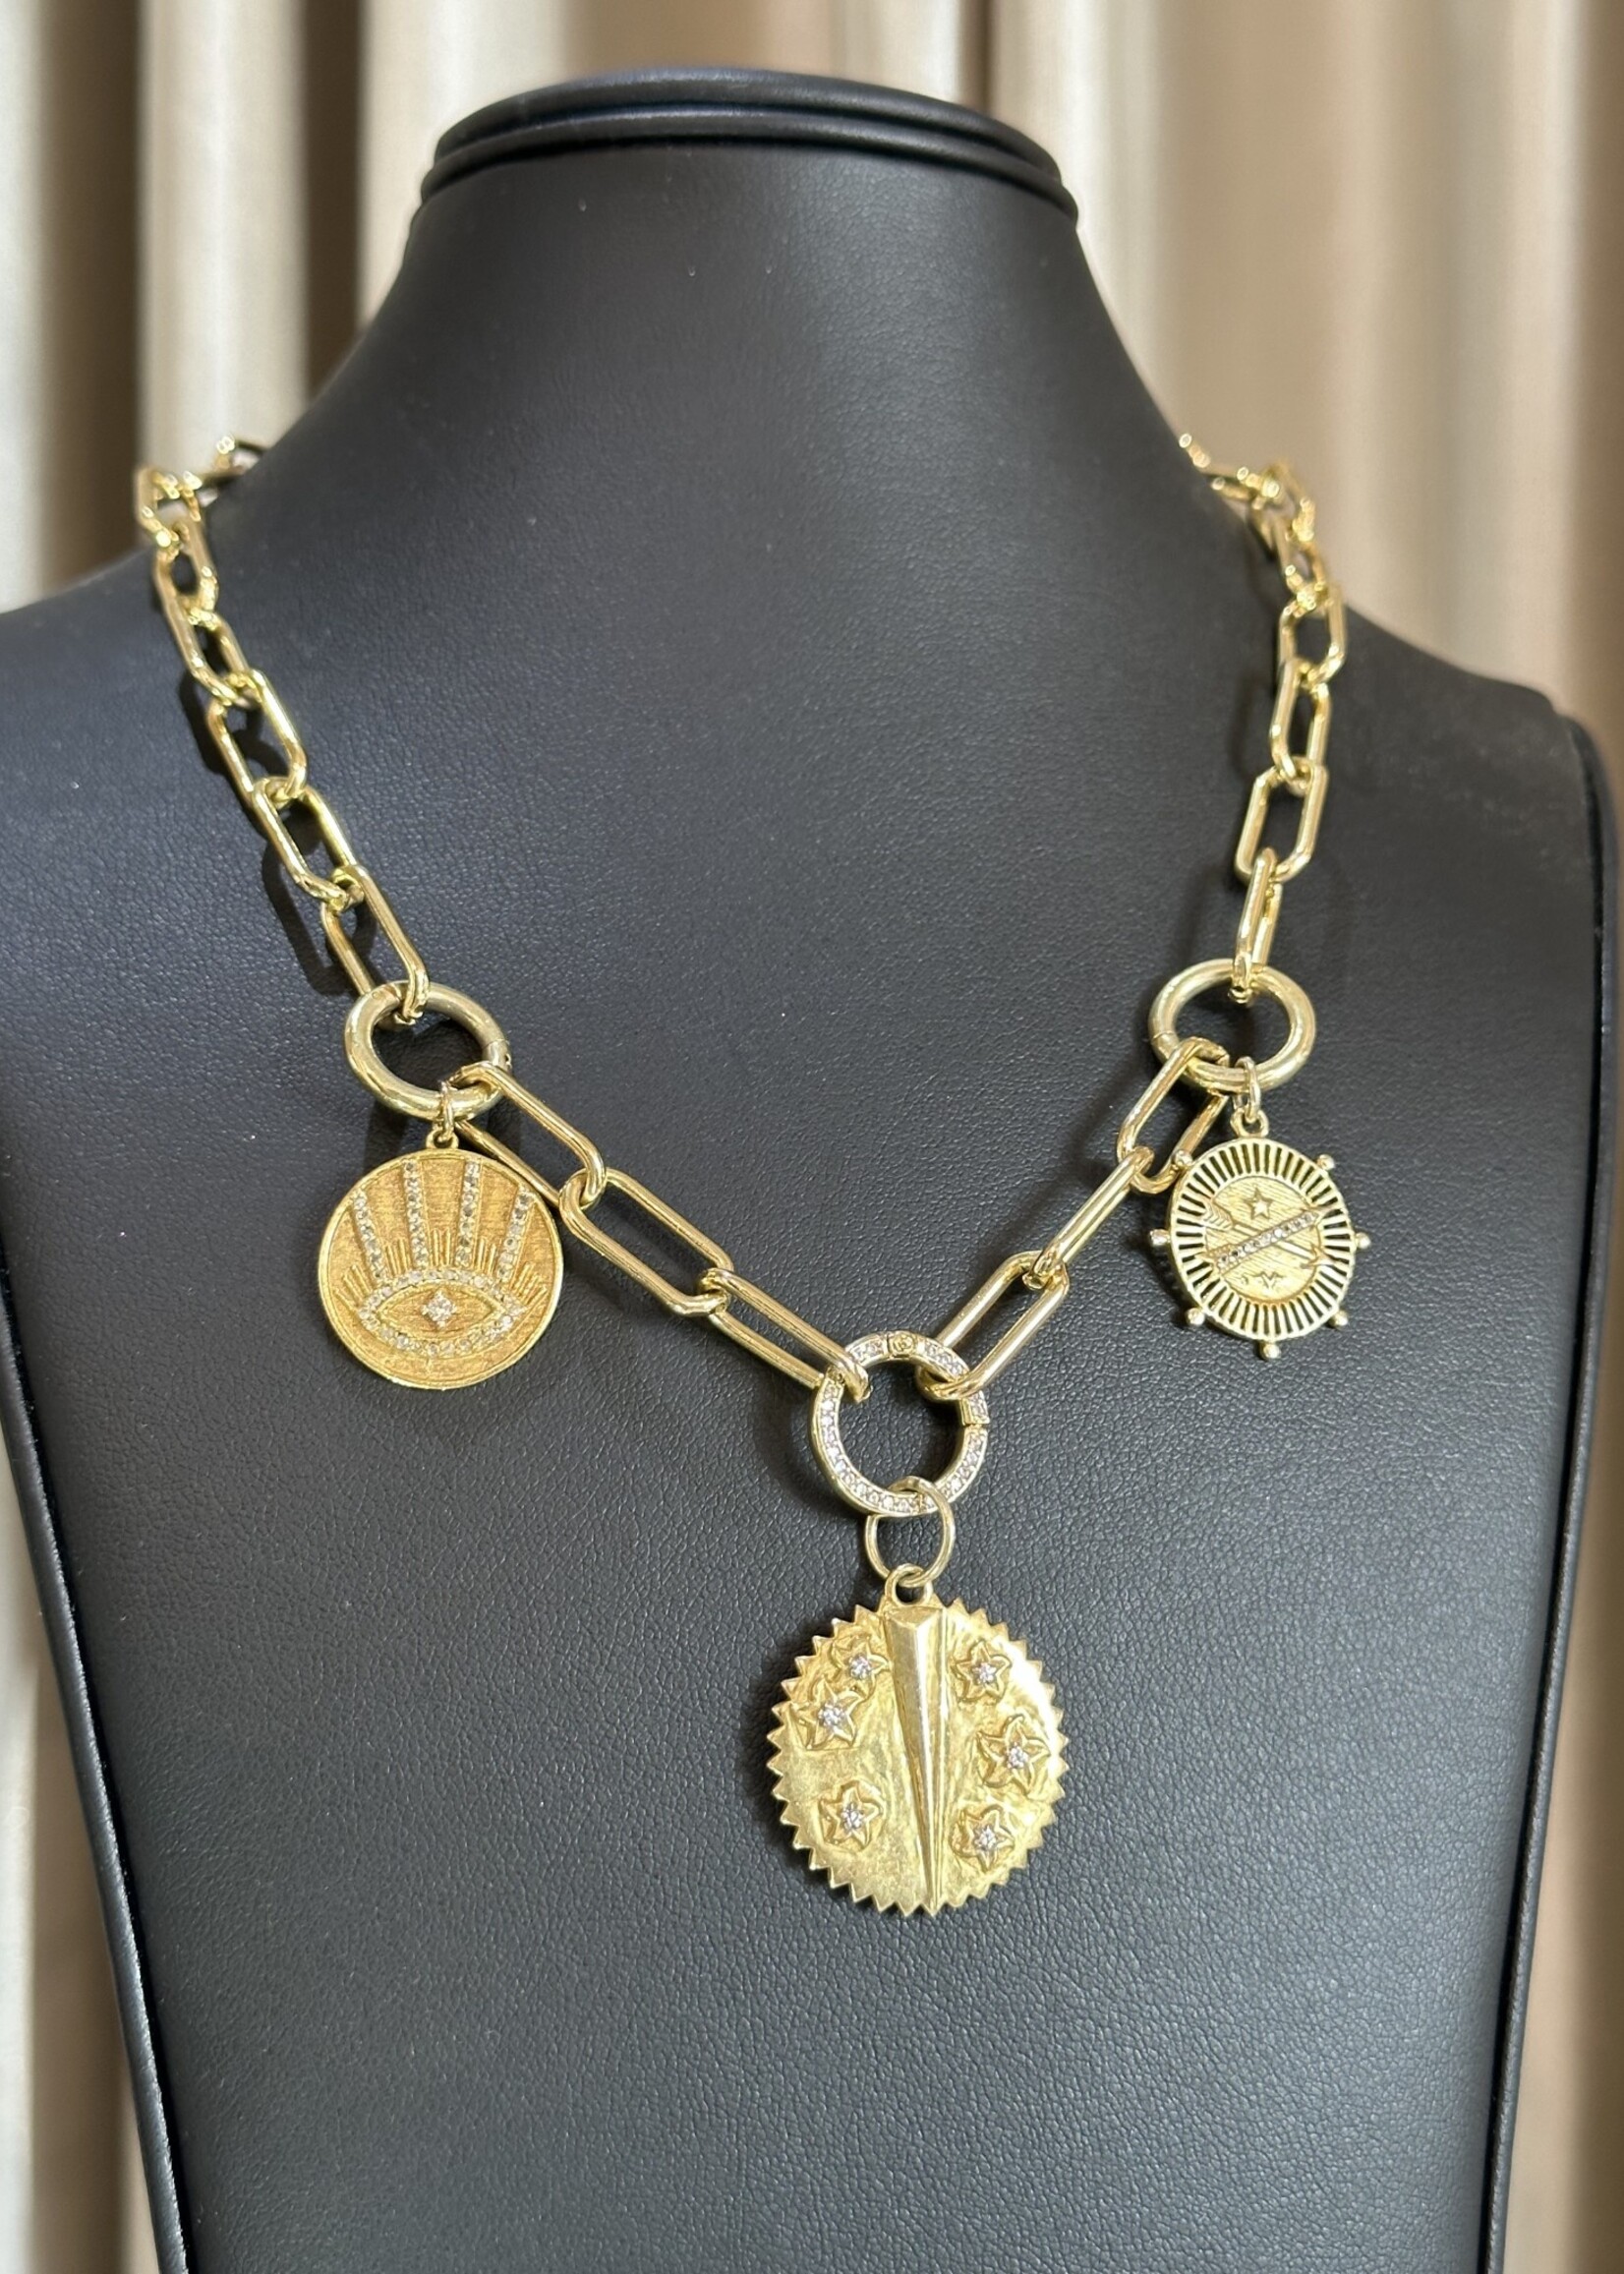 Mina Danielle Gold Link Chain with 3 Round Gold Charms and Circle Connectors